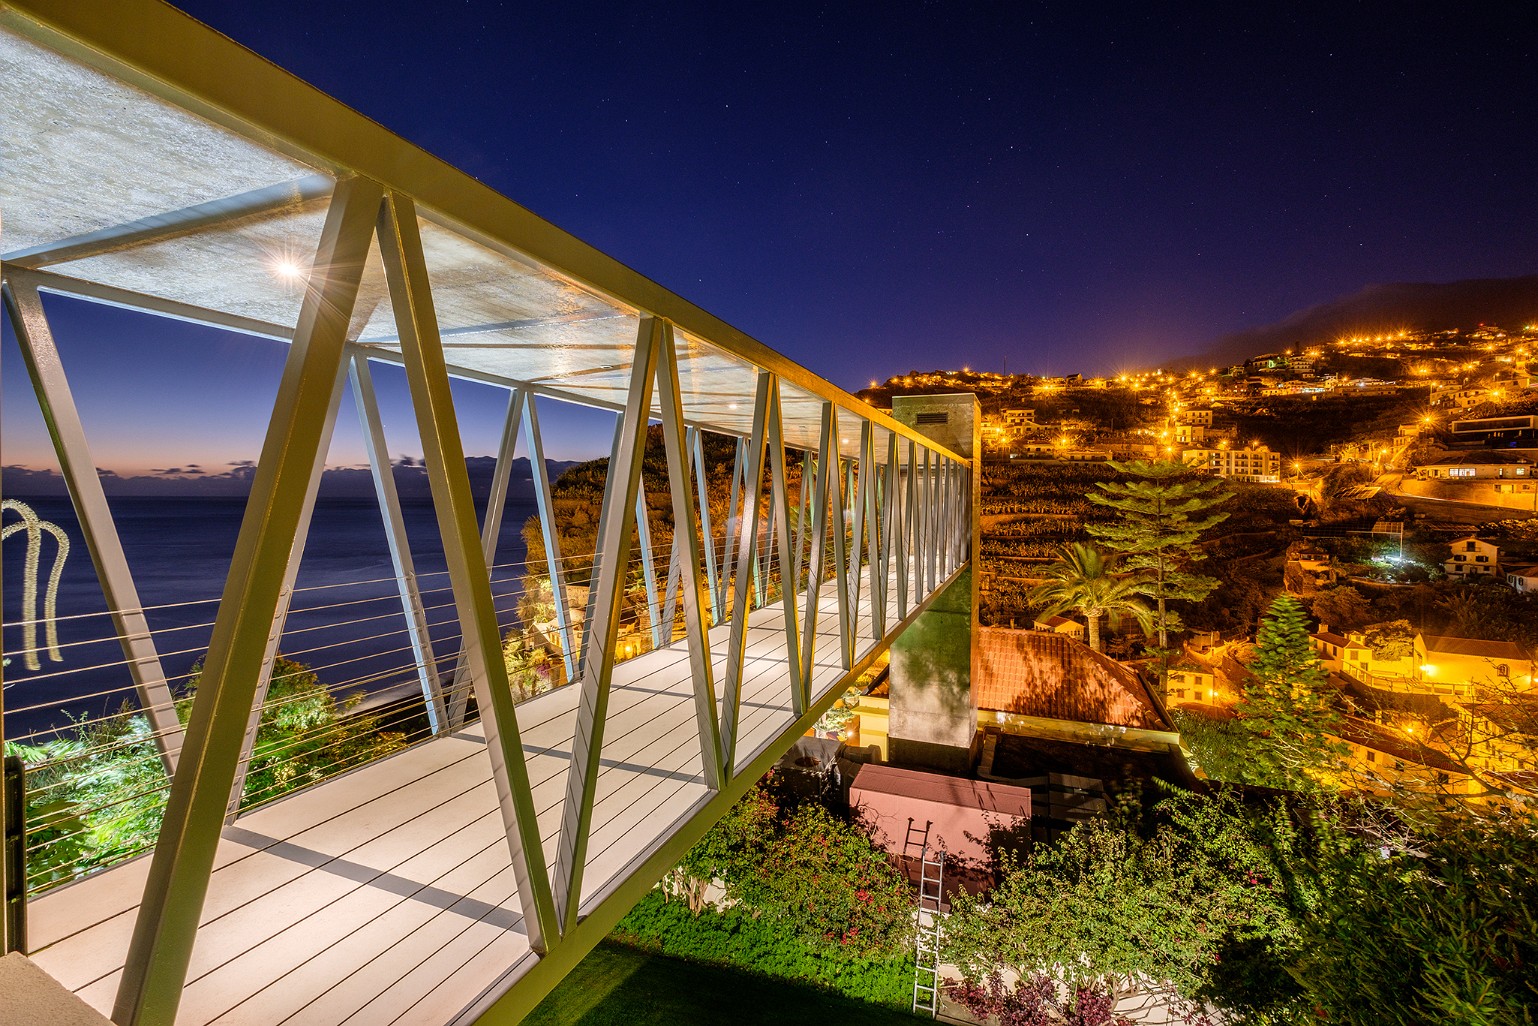 Madeira_0424_Hotel_evening-out-bridge_X-T2_10mm_f6,4_4,5s_ISO200-HDR_LR66_sRGB_web